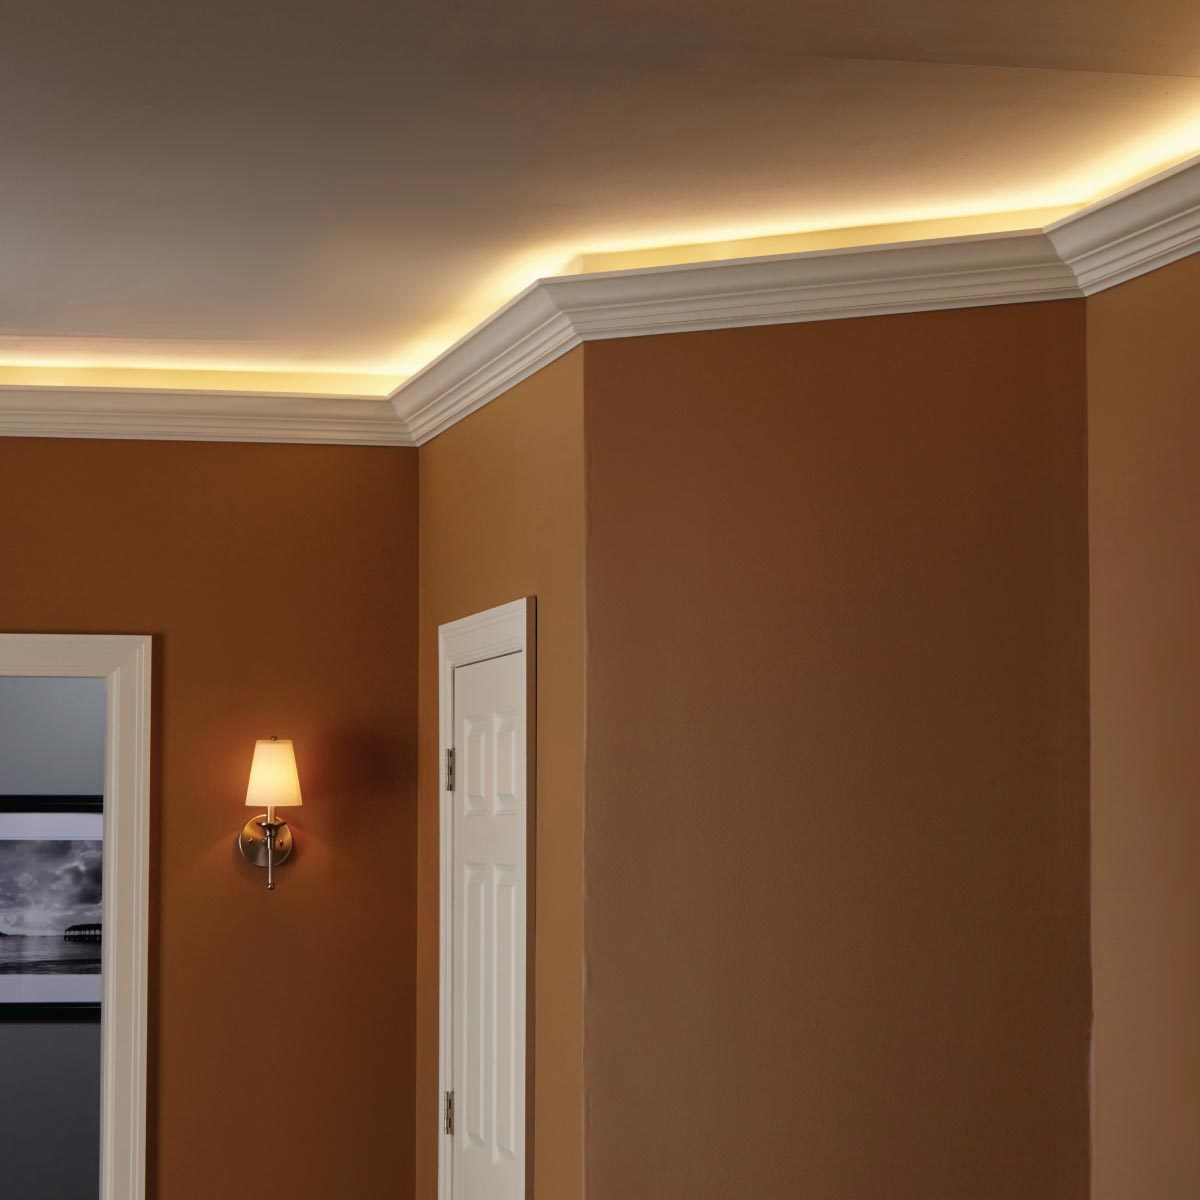 How To Install Elegant Cove Lighting From Crown Molding